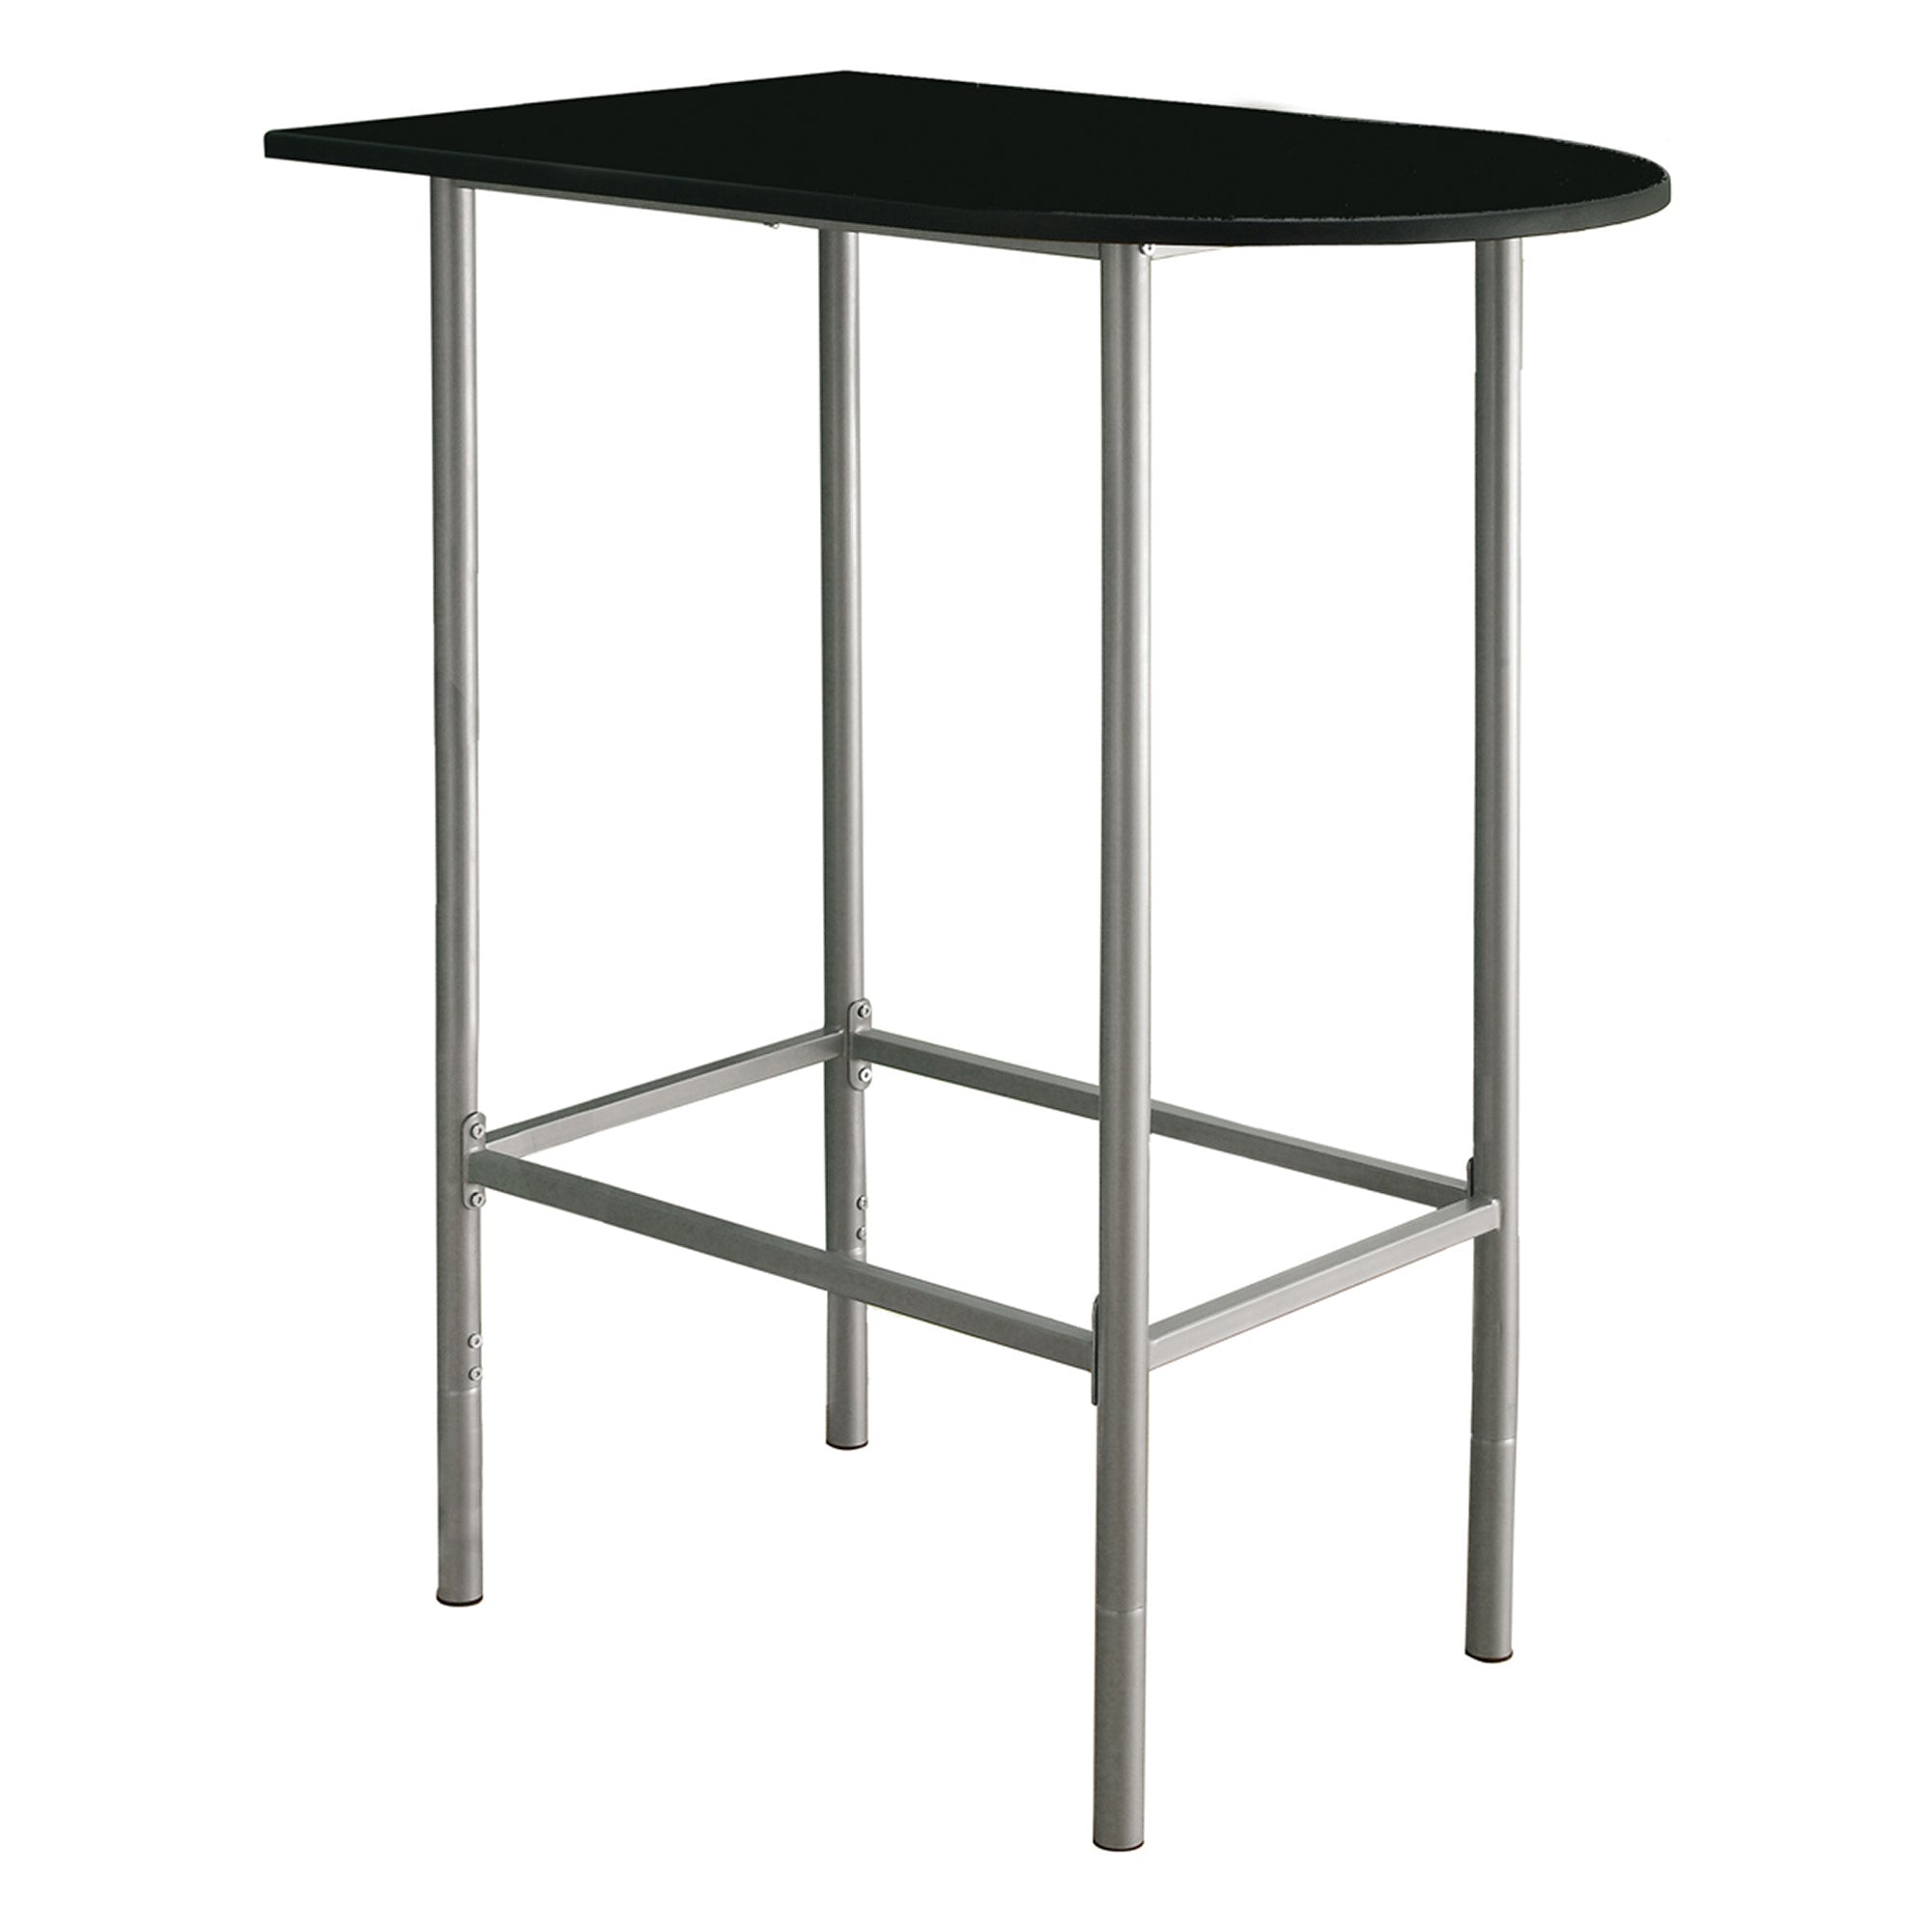 24" Black And Silver Free Form Manufactured Wood Bar Table